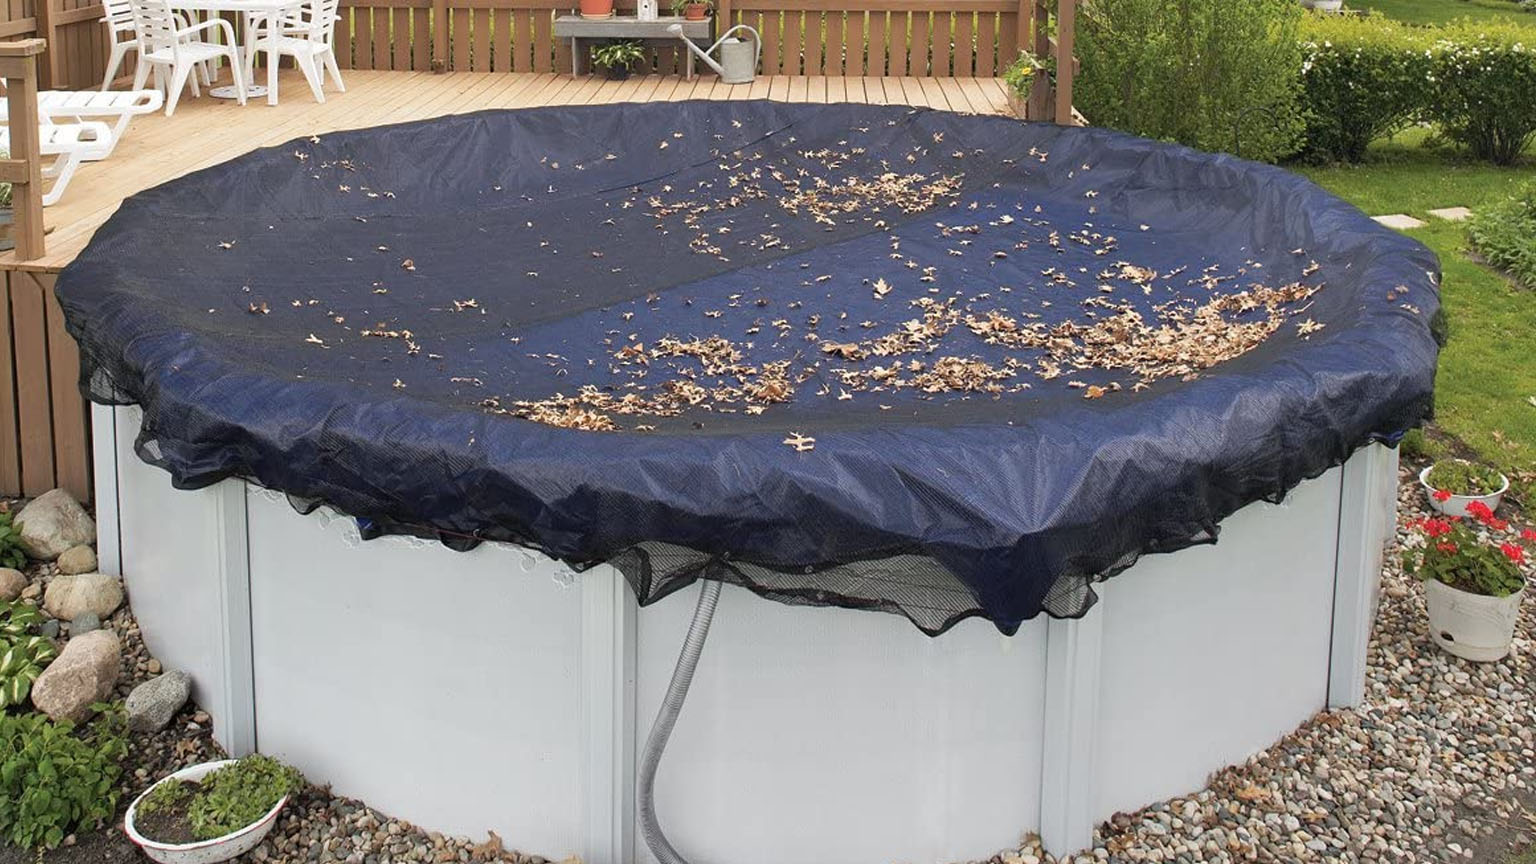 How to choose the best leaf net pool covers